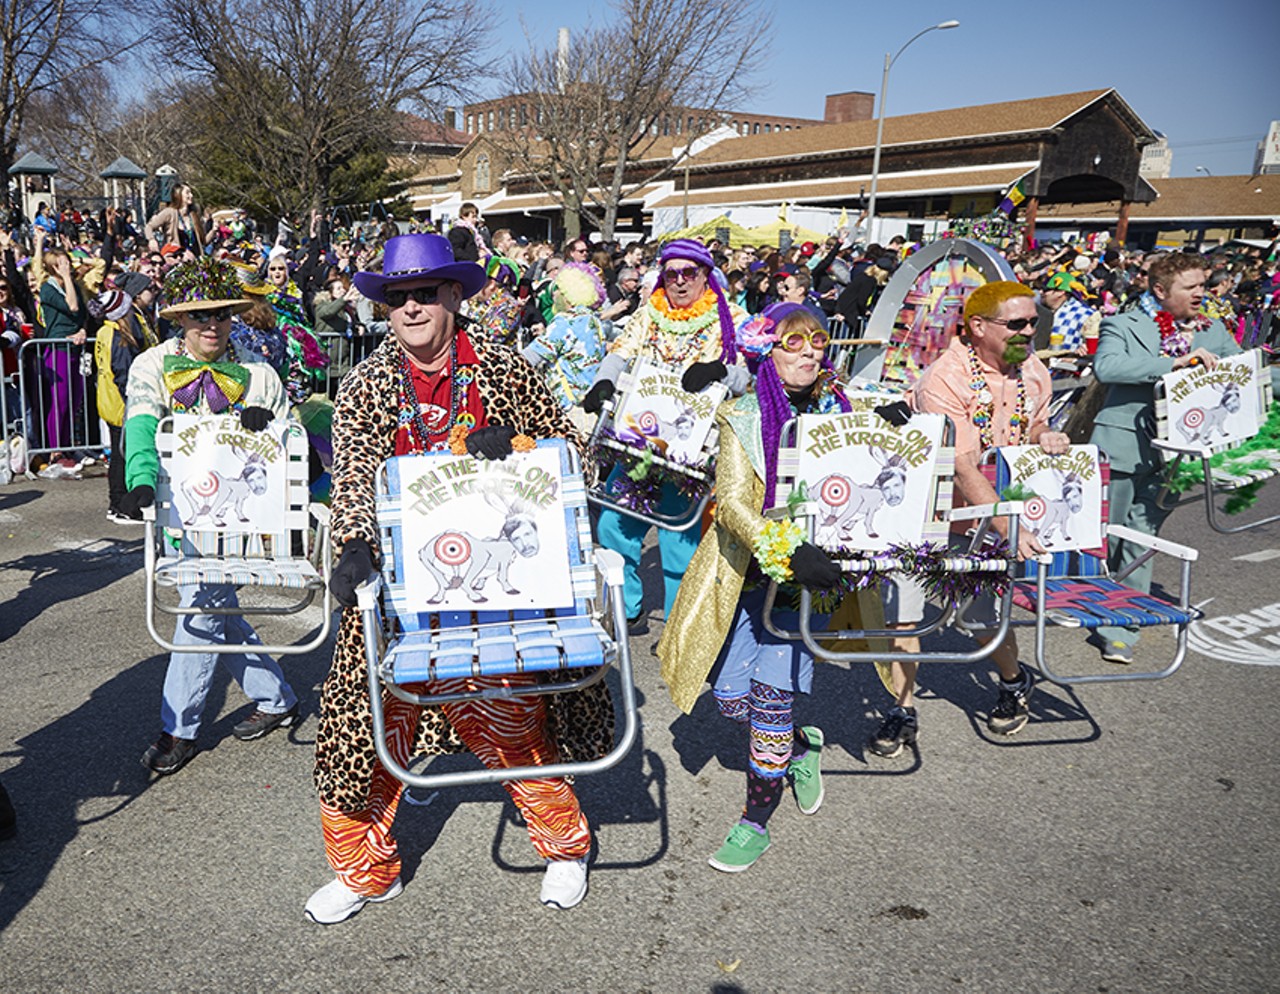 The Gateway Precision Lawn Chair Krewe proudly parading with their "pin the tail on the Kroenke" chairs.